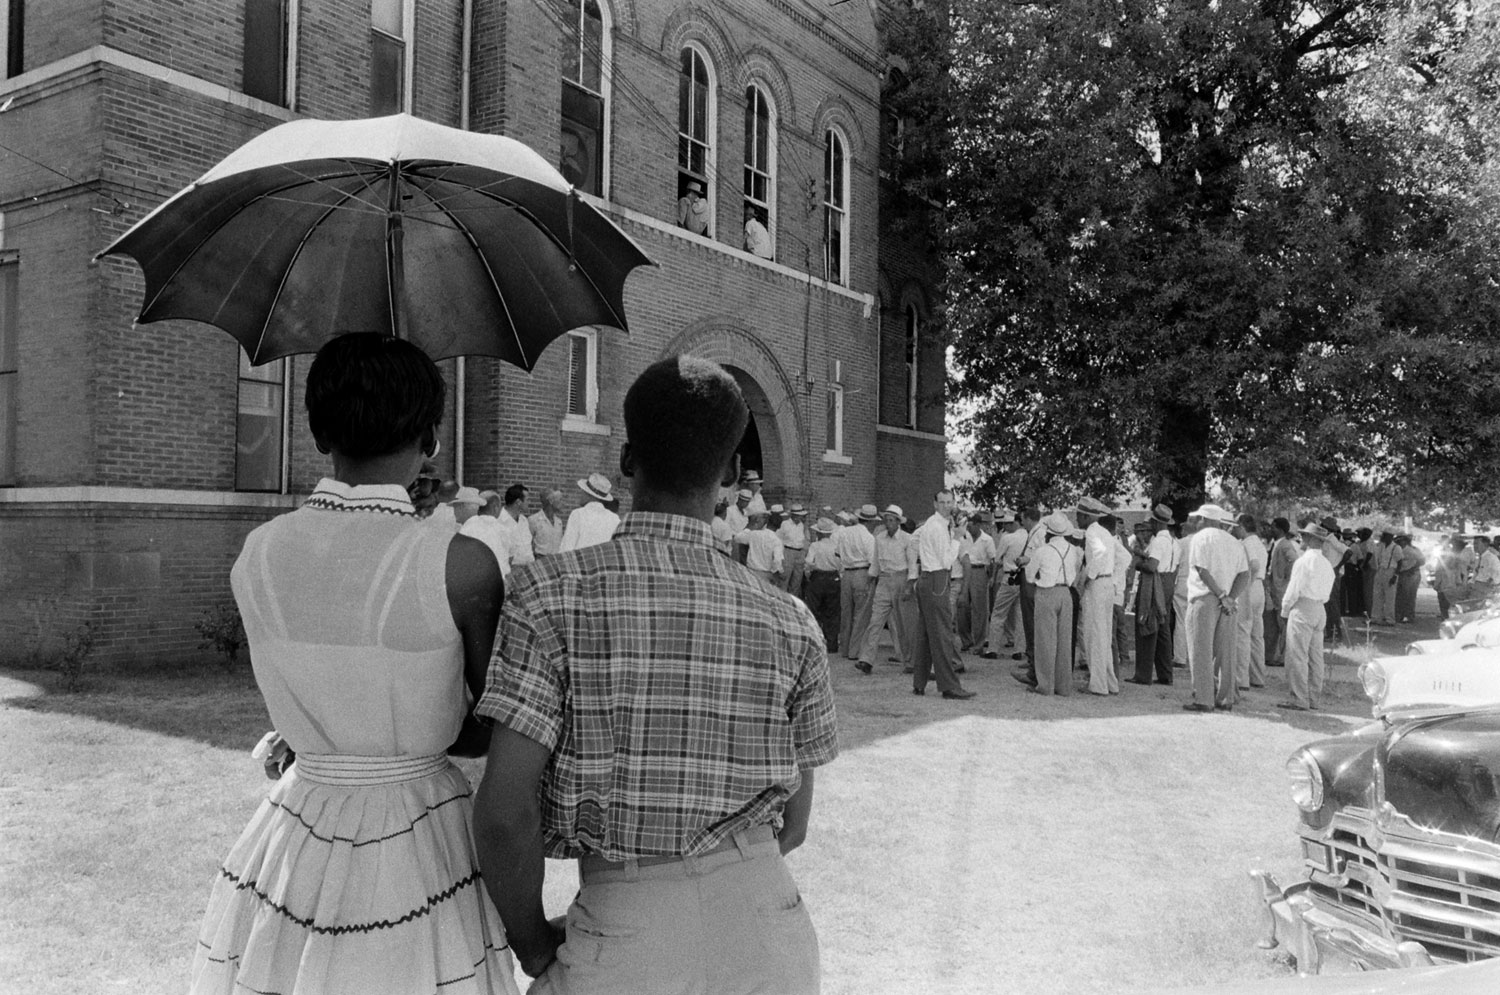 A scene in Sumner, Miss., during the trial of Roy Bryant and J.W. Milam for the kidnapping and murder of Emmett Till.